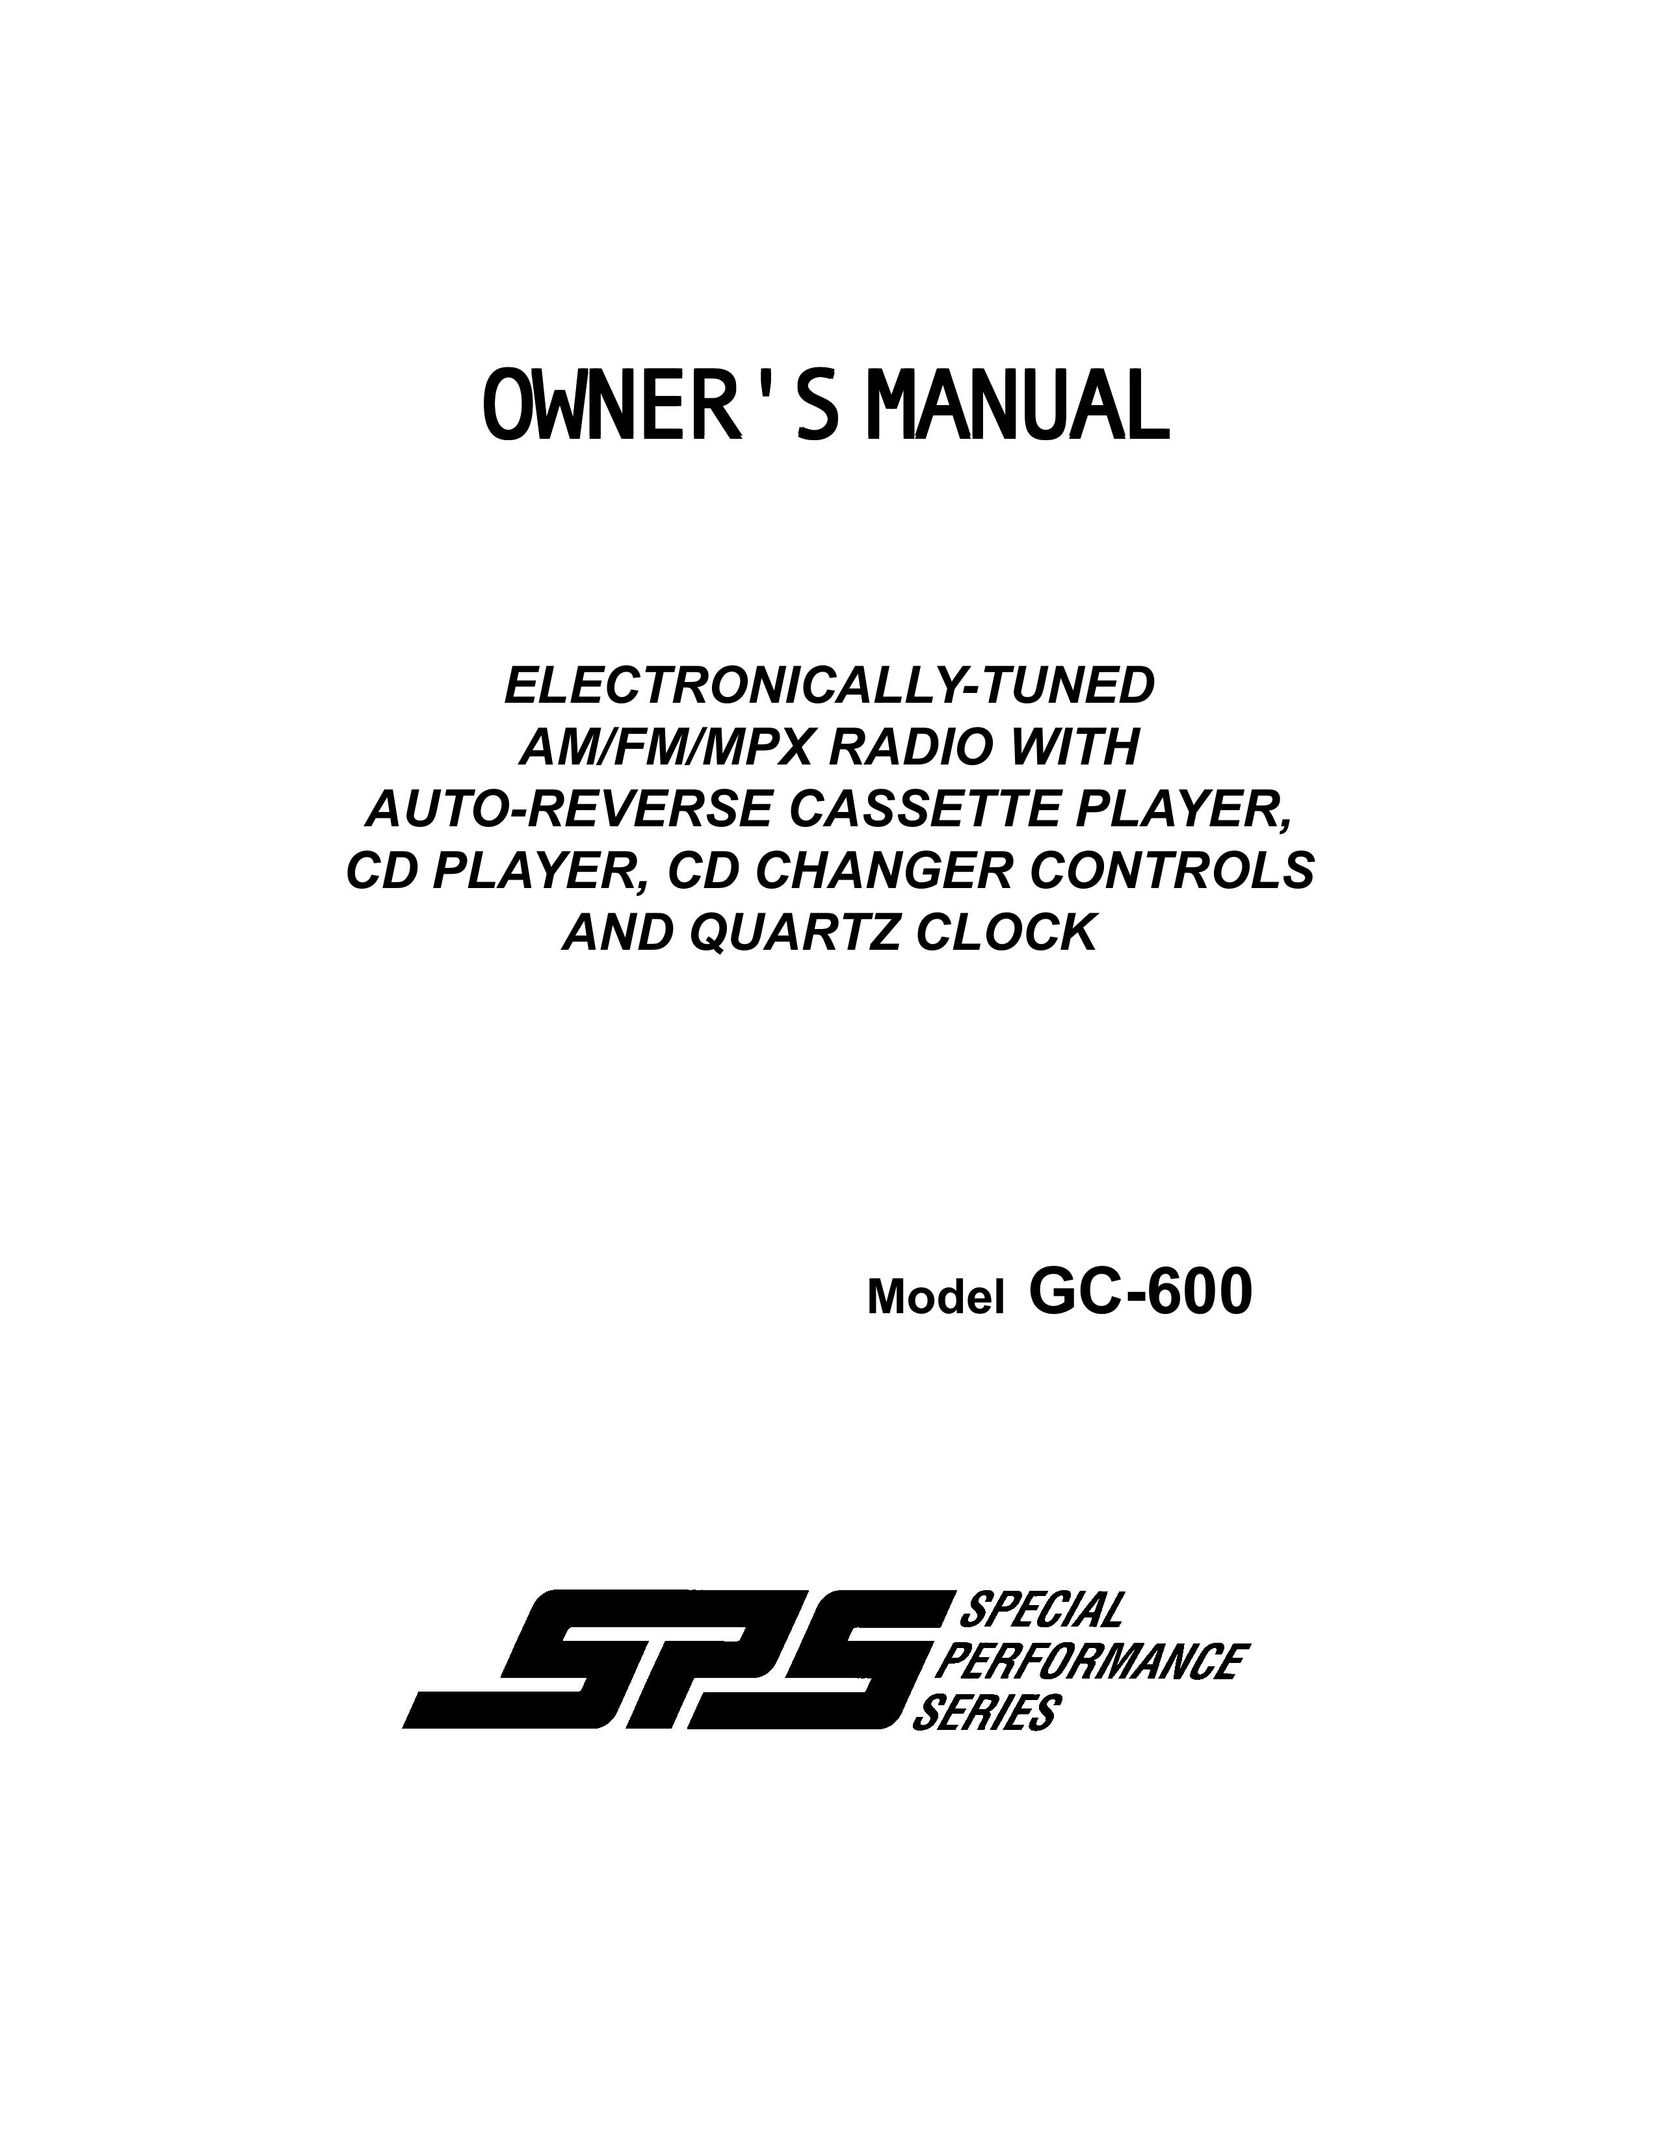 Audiovox AXTM600 Stereo System User Manual